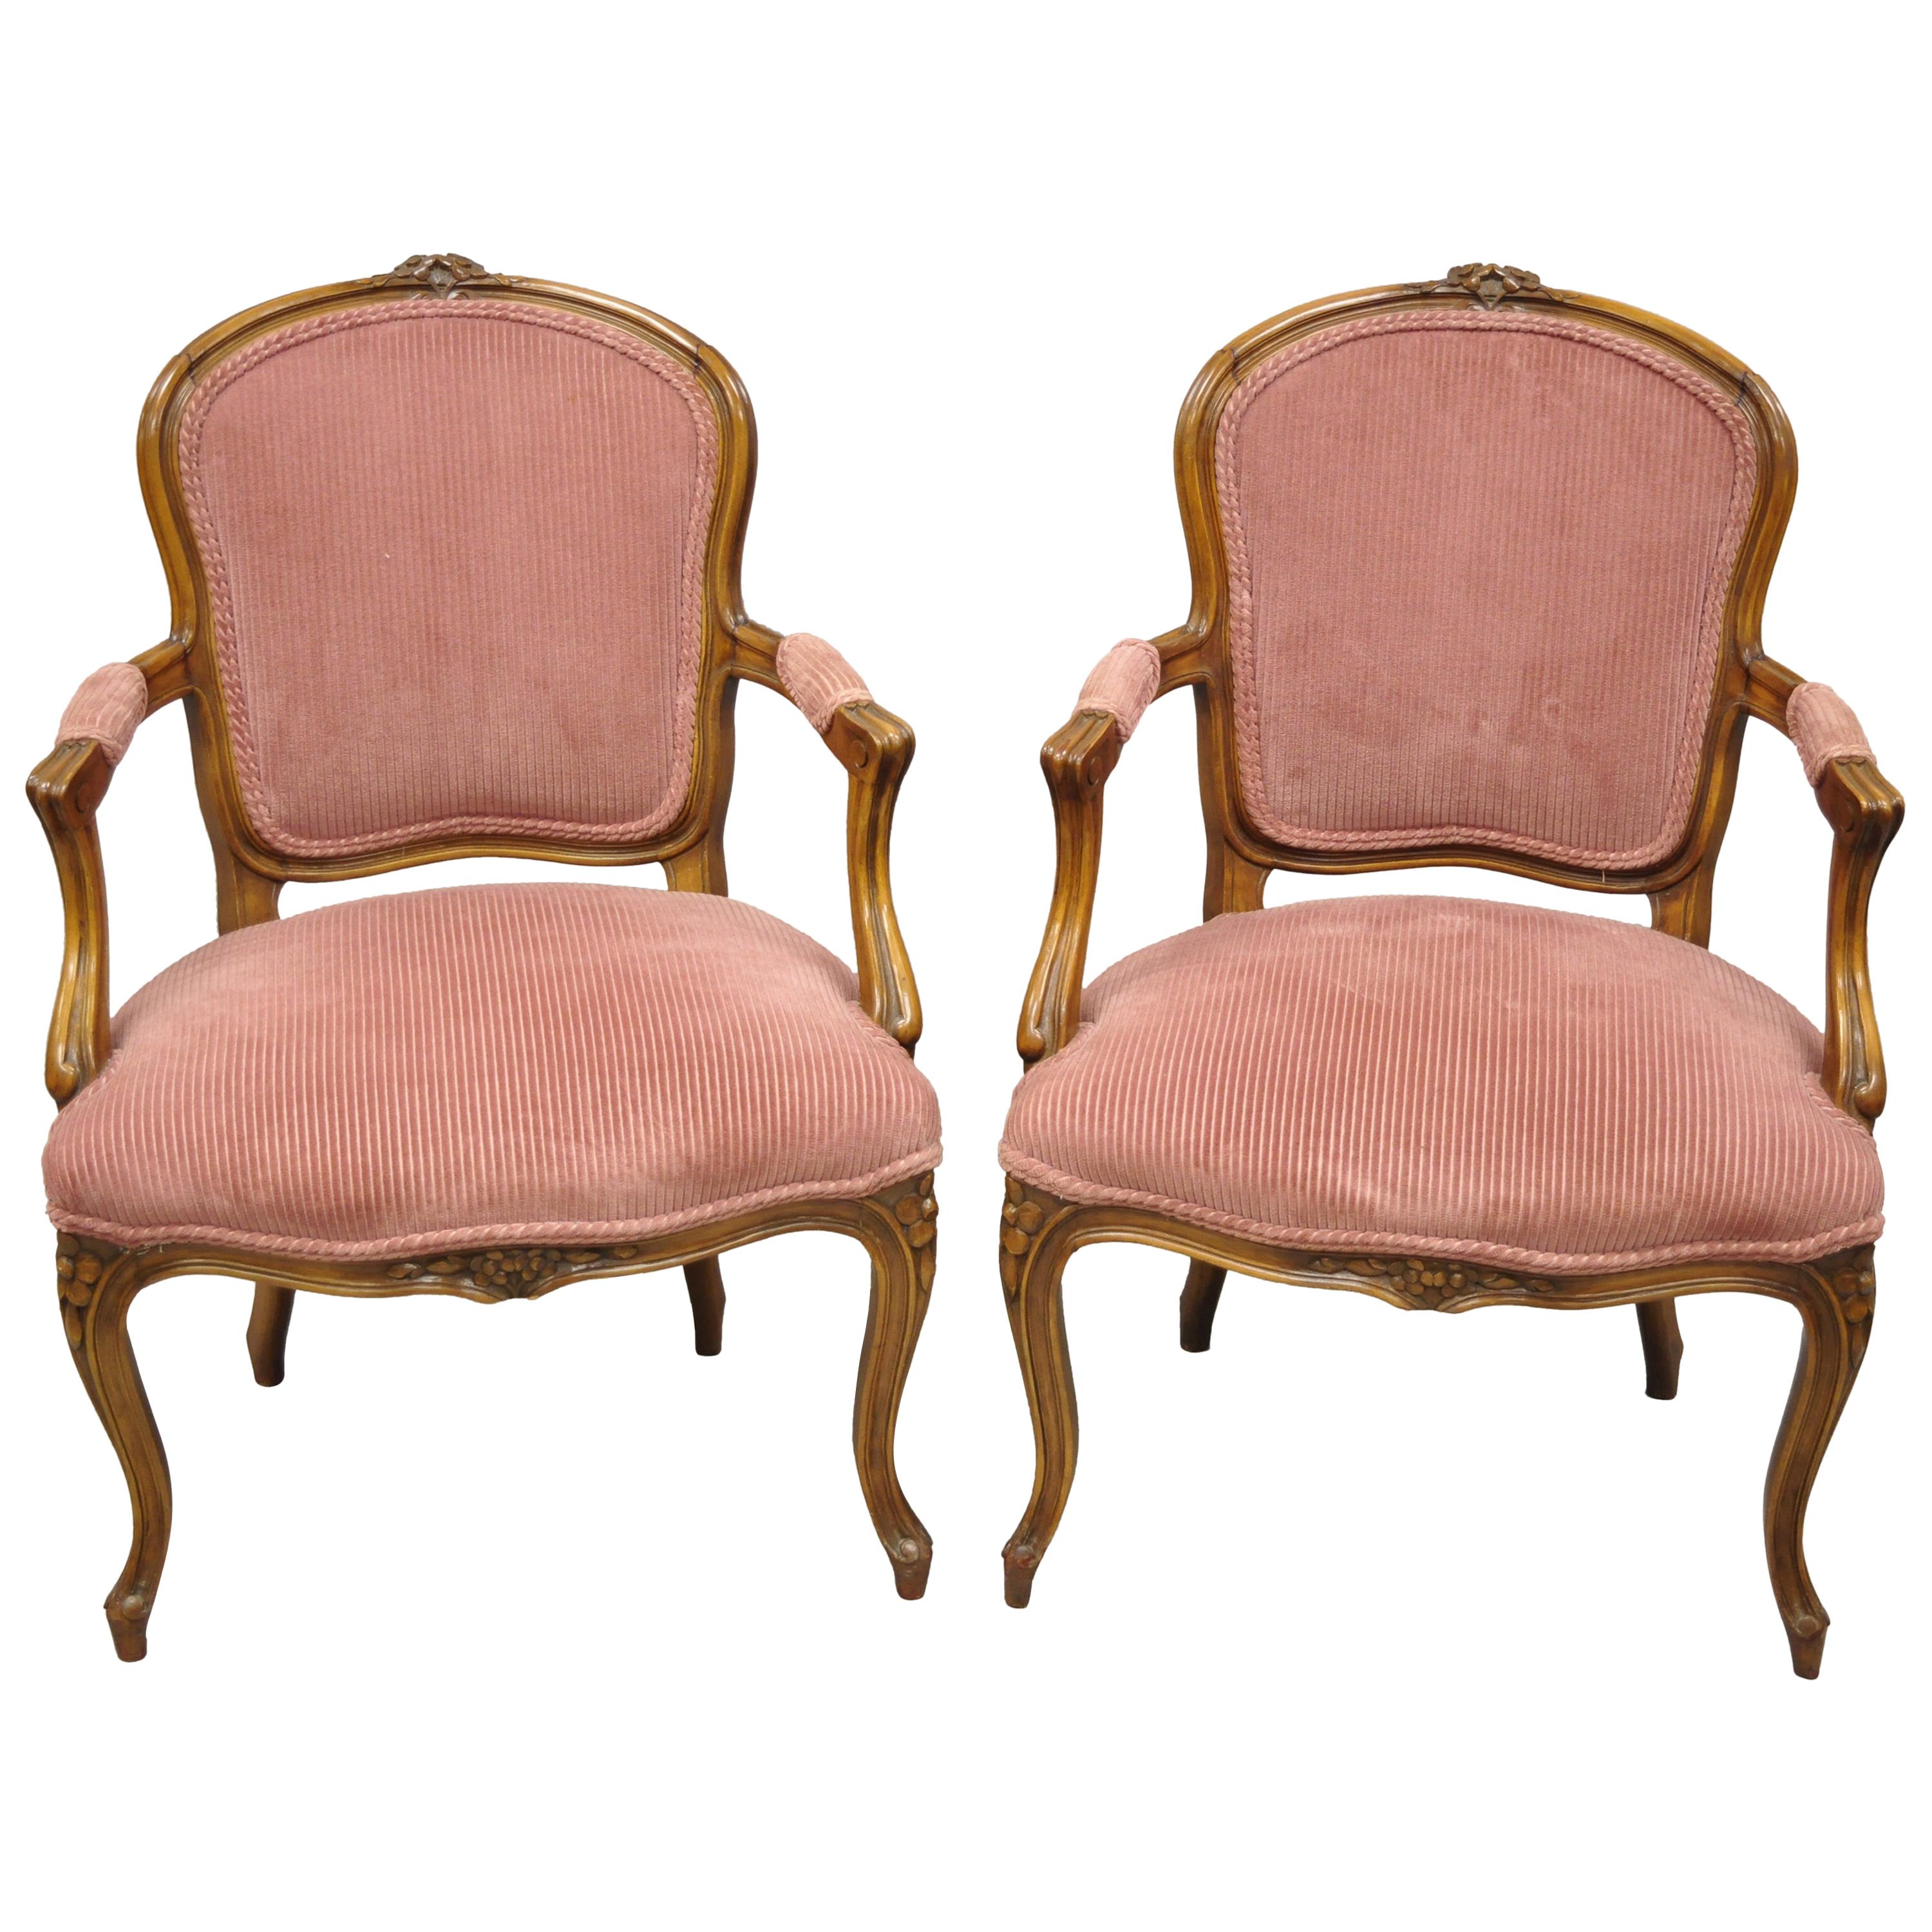 Pair of Antique French Provincial Louis XV Style Carved Walnut Small Armchairs